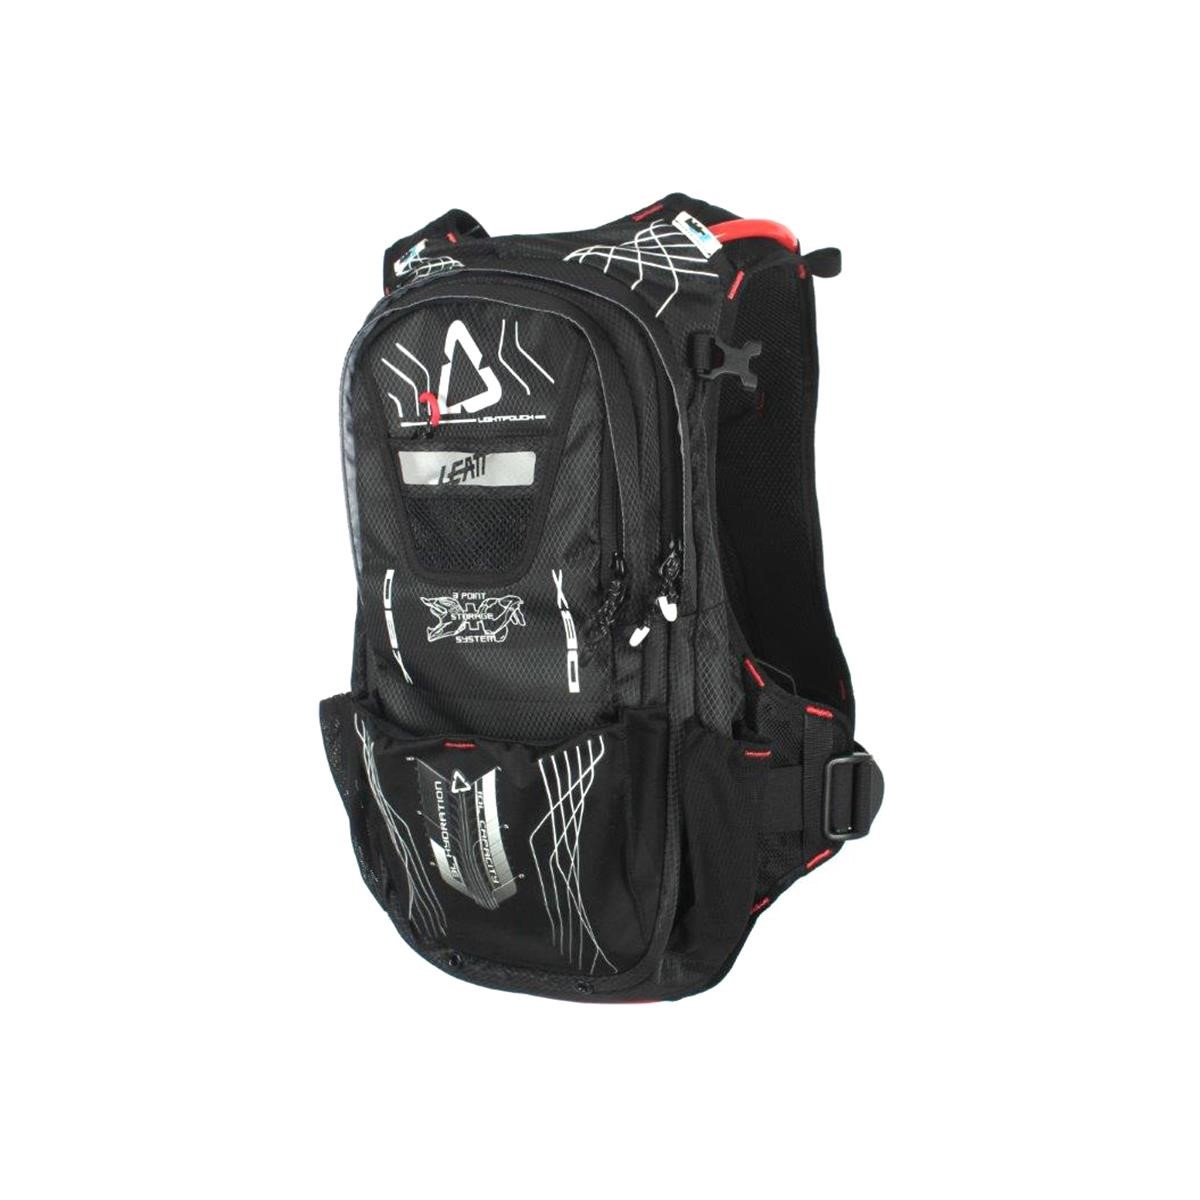 Leatt Protector Backpack with Hydration System DBX Cargo 3.0 Black/White/Red, 10 L